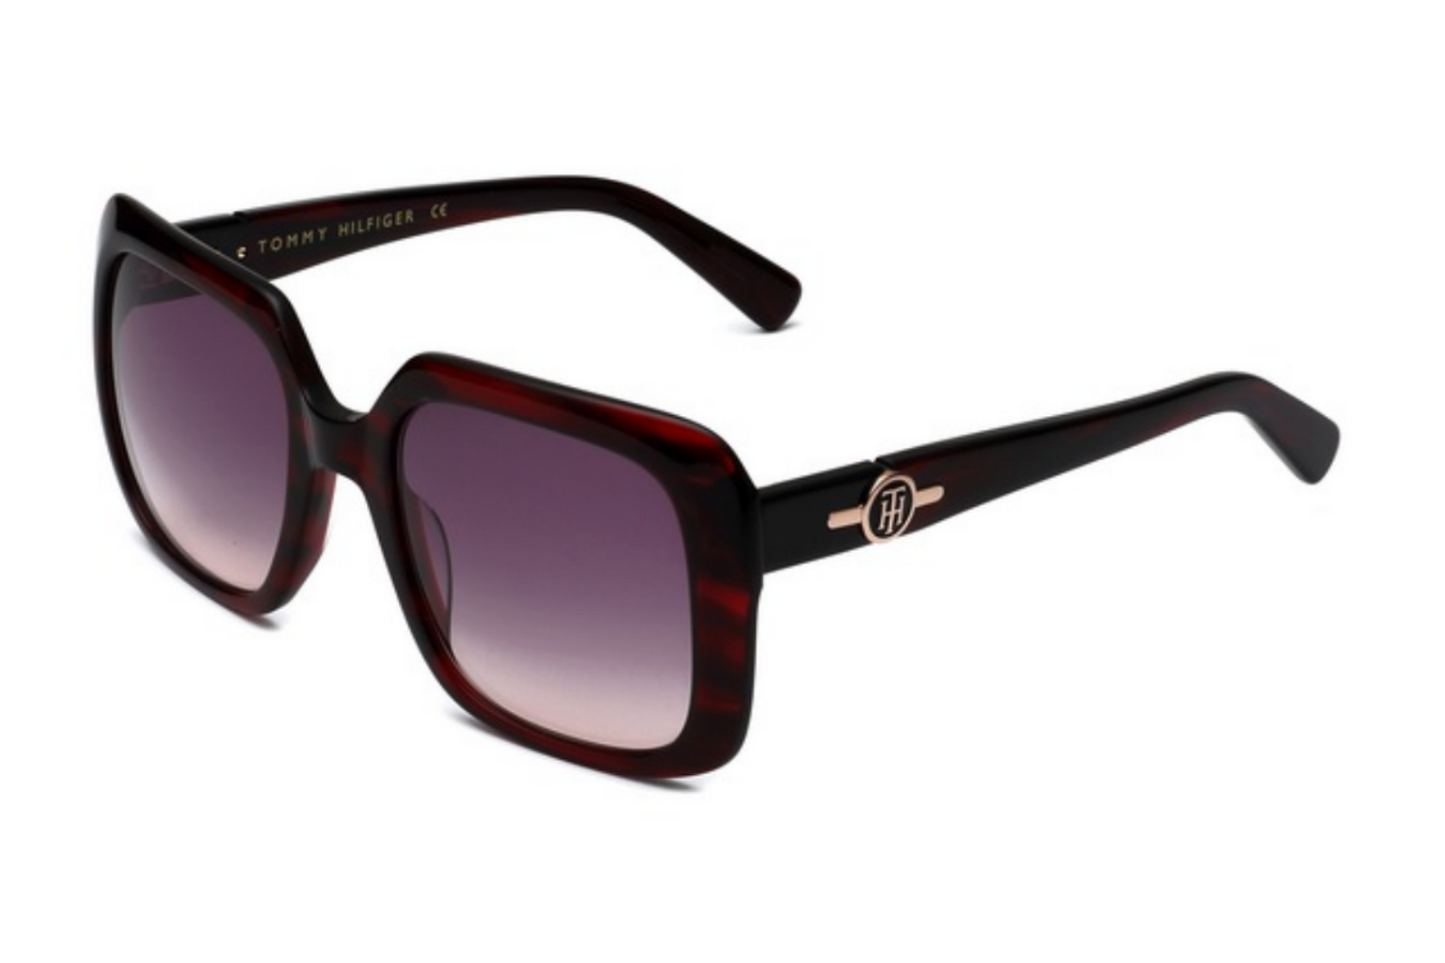 Tommy Hilfiger Sunglasses TH2610 C4 NEW ARRIVAL